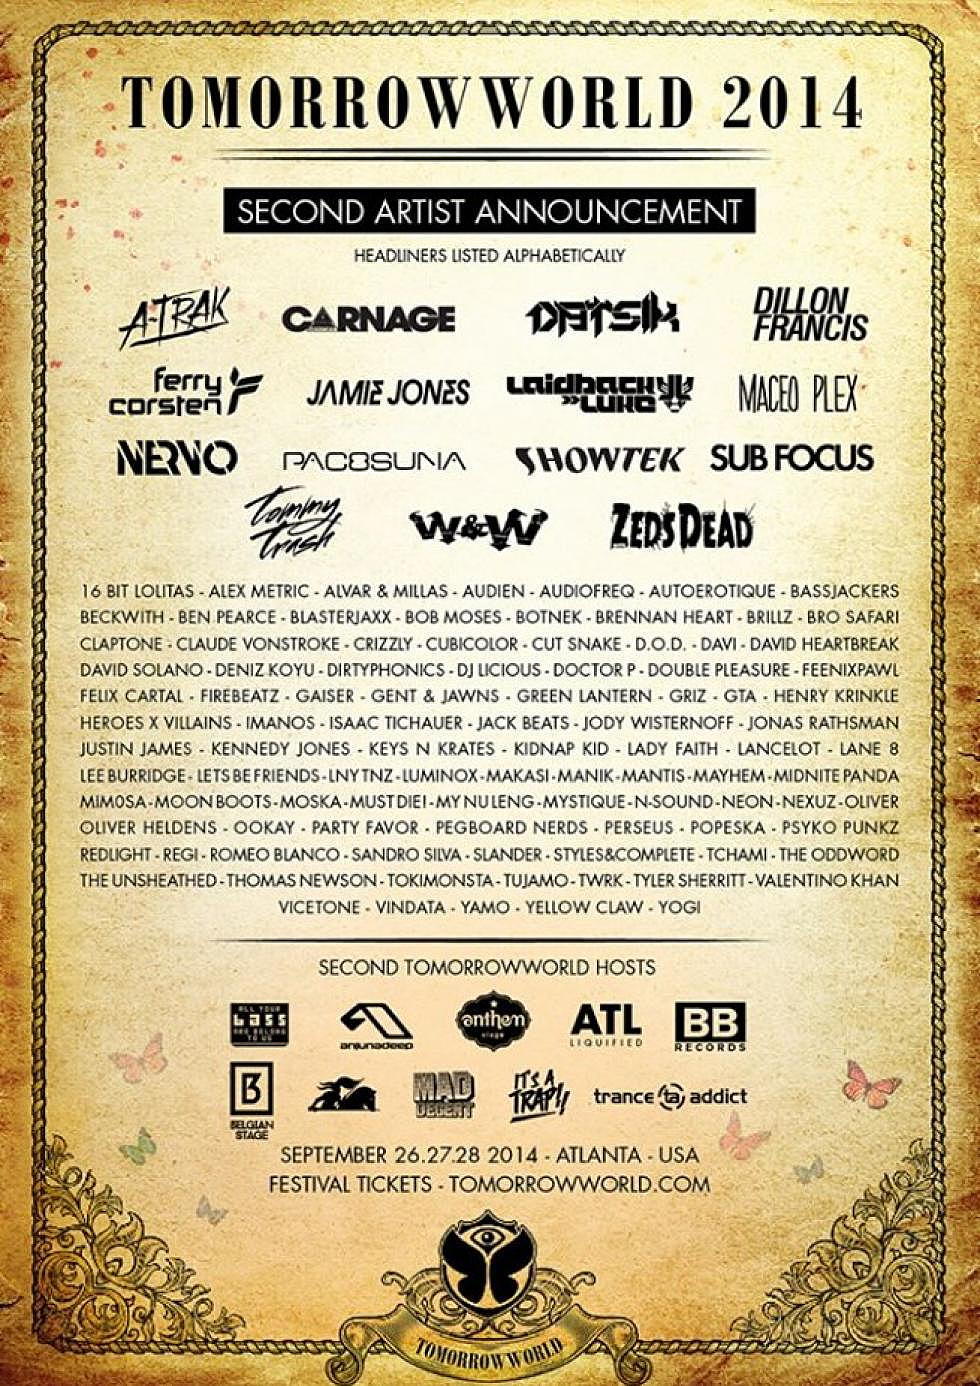 TomorrowWorld Announces Phase 2 of Lineup!